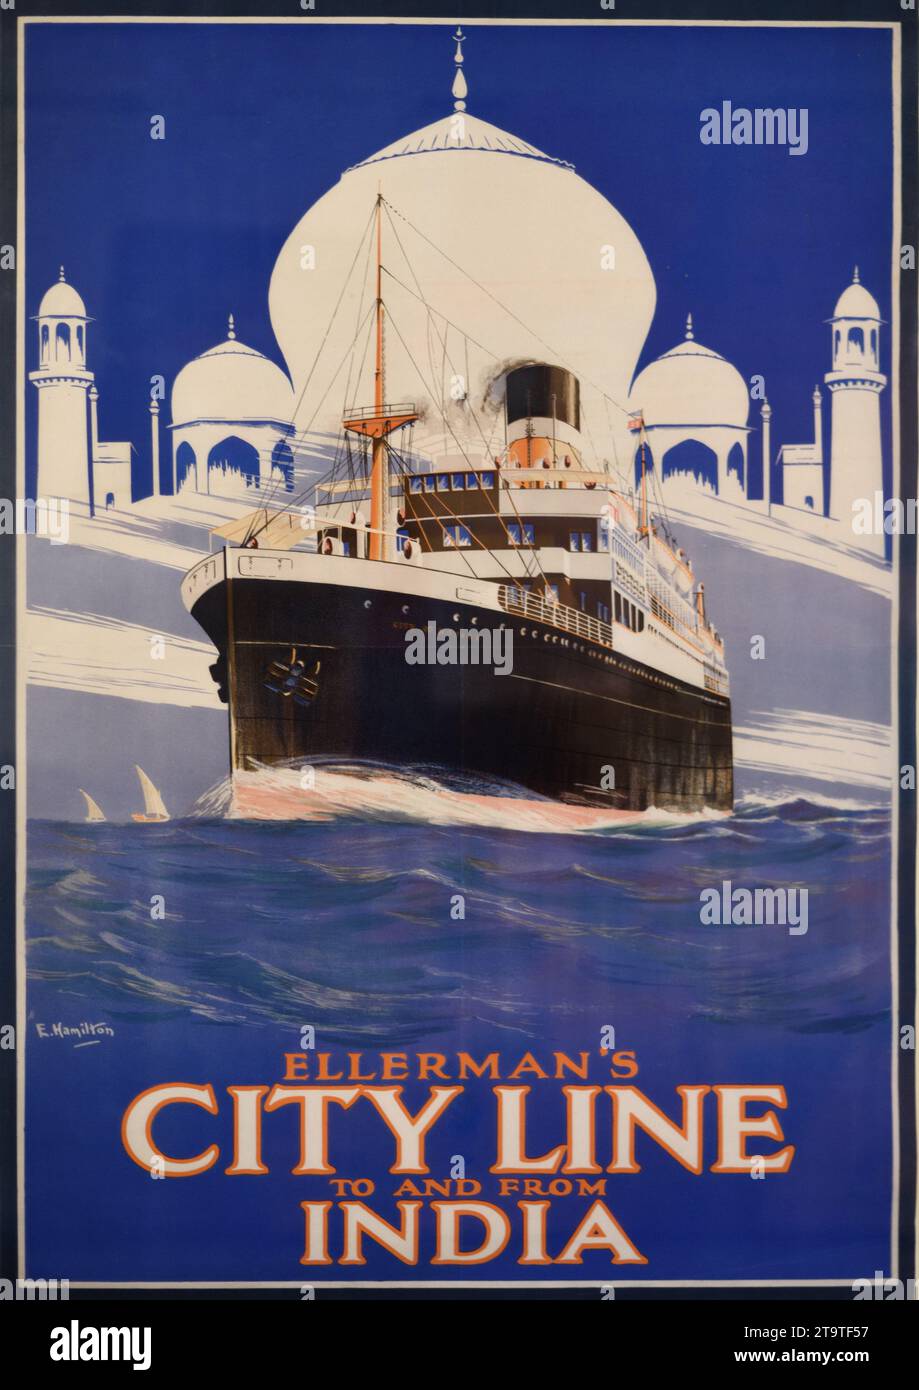 Vintage Advert, Advertisement, Publicity or Poster for Ellerman's City Line Passenger Ships to India c1910 Stock Photo